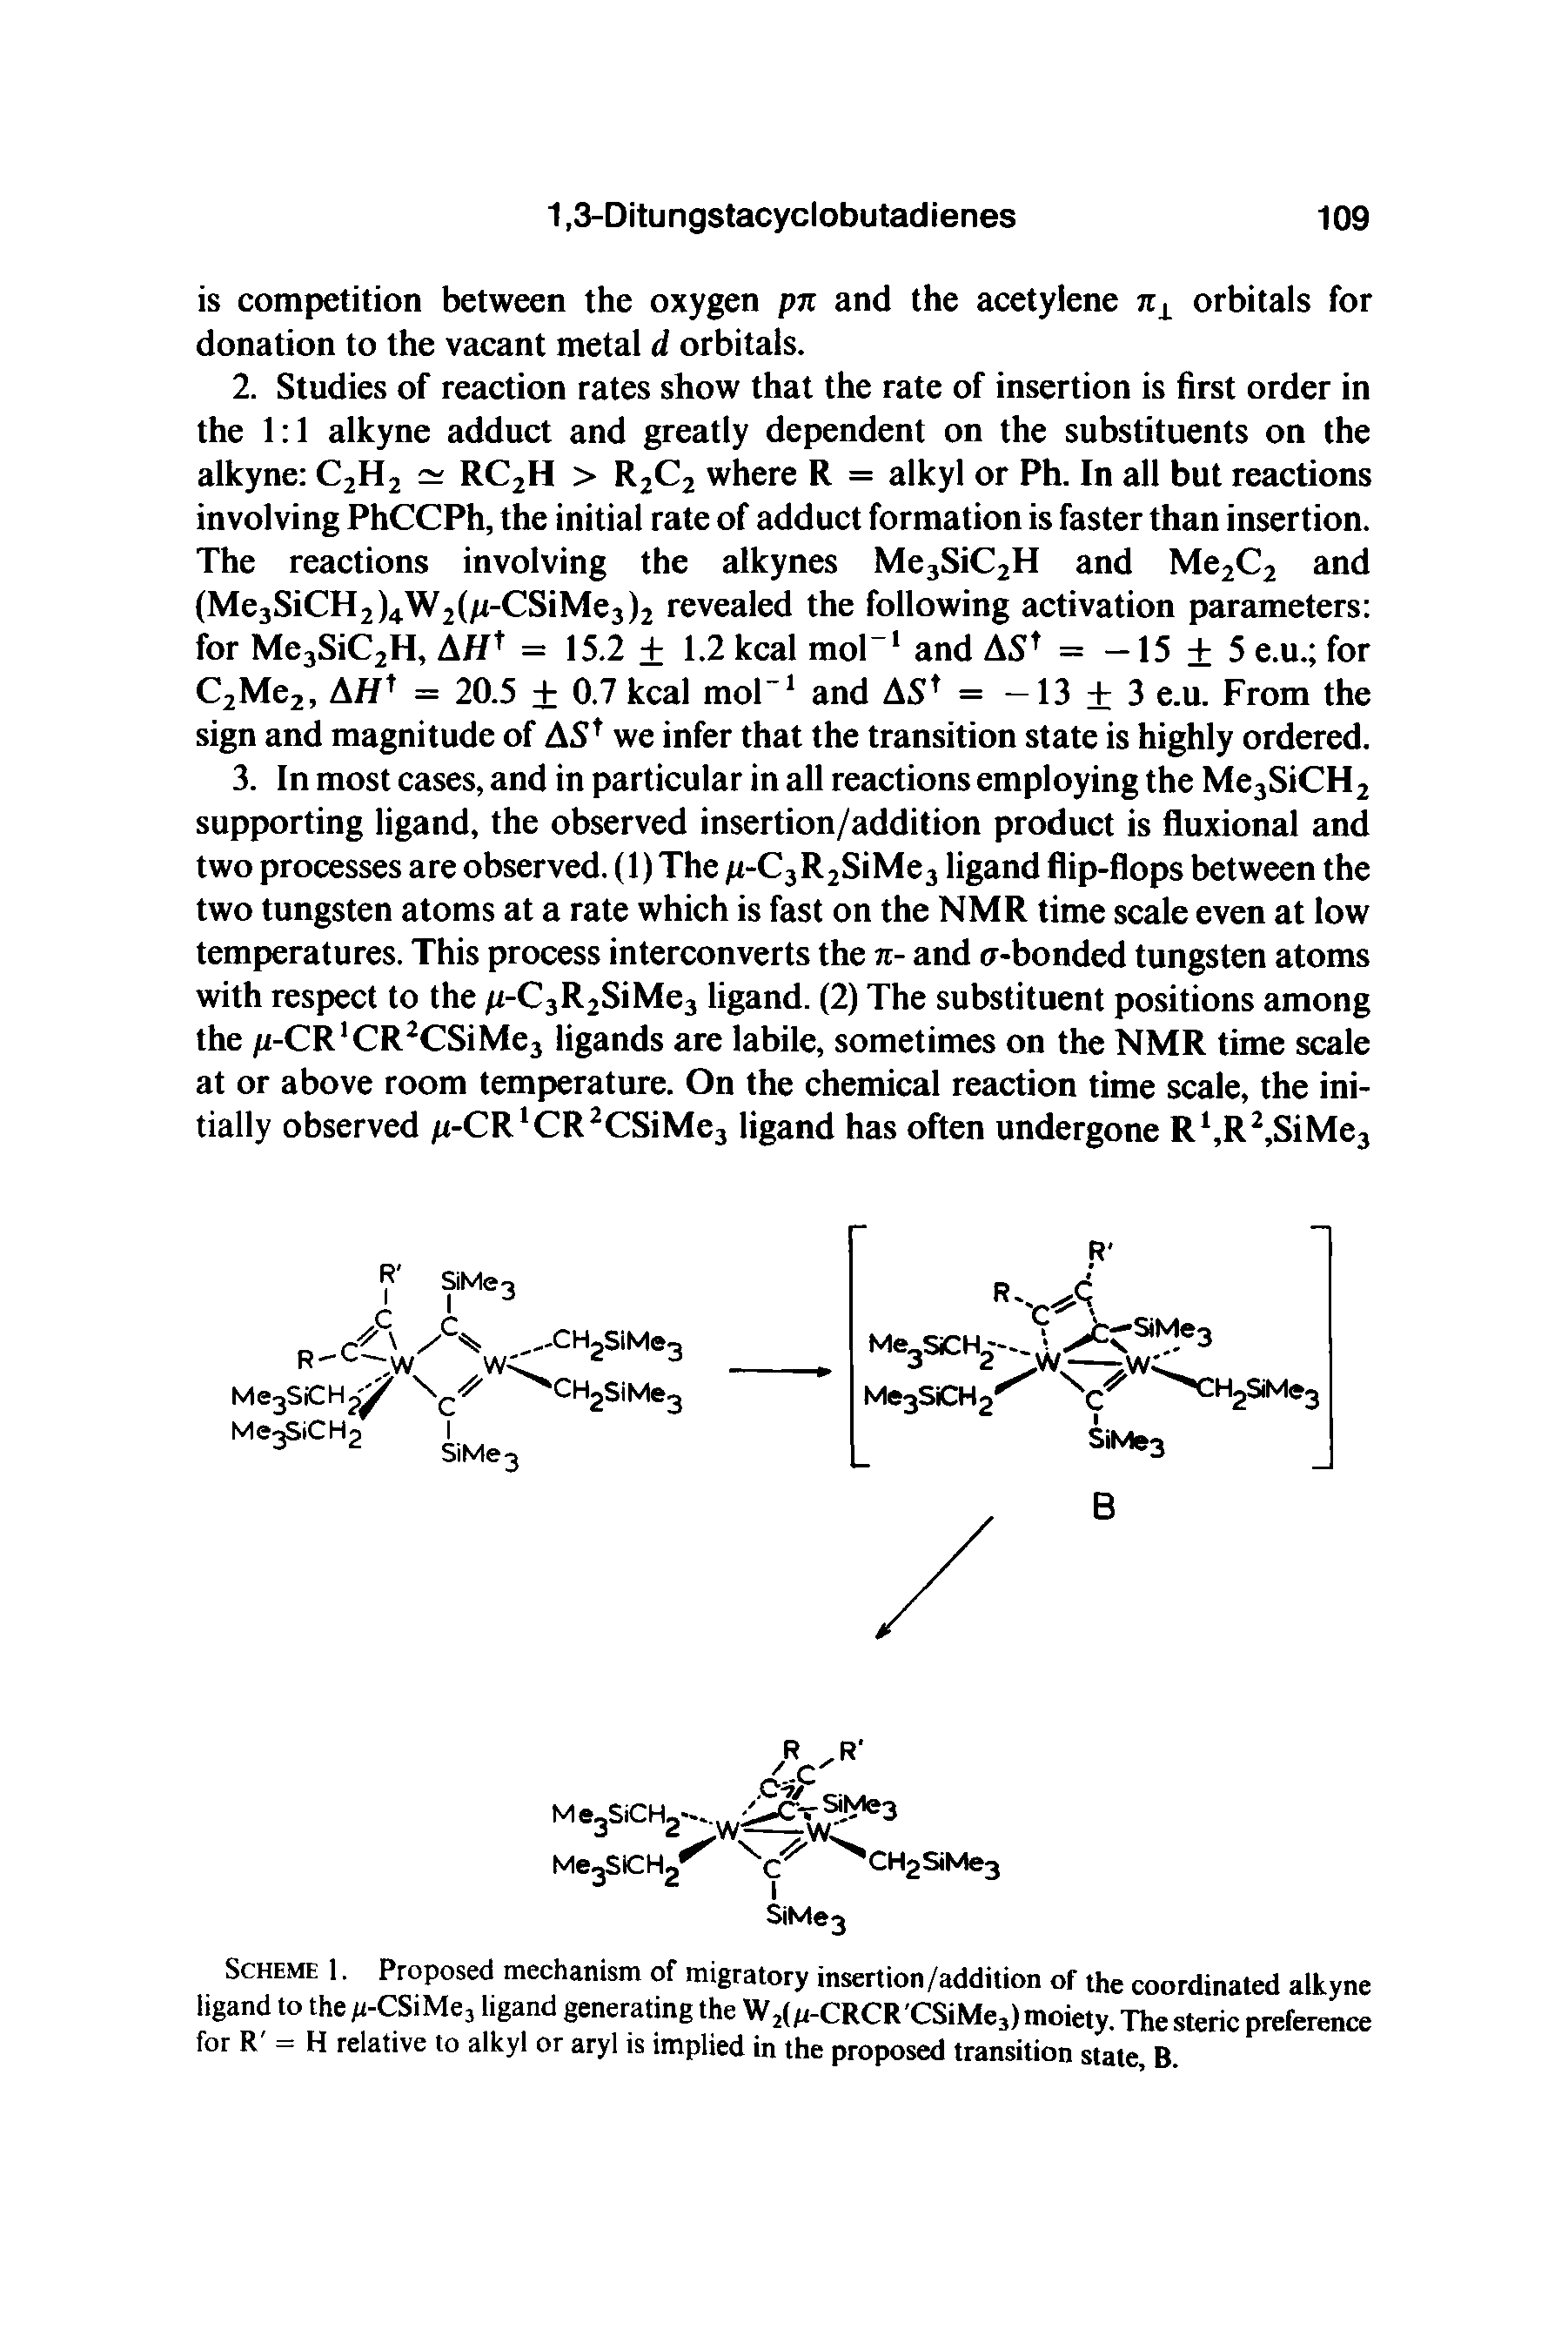 Scheme 1. Proposed mechanism of migratory insertion/addition of the coordinated alkyne ligand to the /i-CSiMe3 ligand generating the W2(/r-CRCR CSiMe3)moiety. The steric preference for R = H relative to alkyl or aryl is implied in the proposed transition state, B.